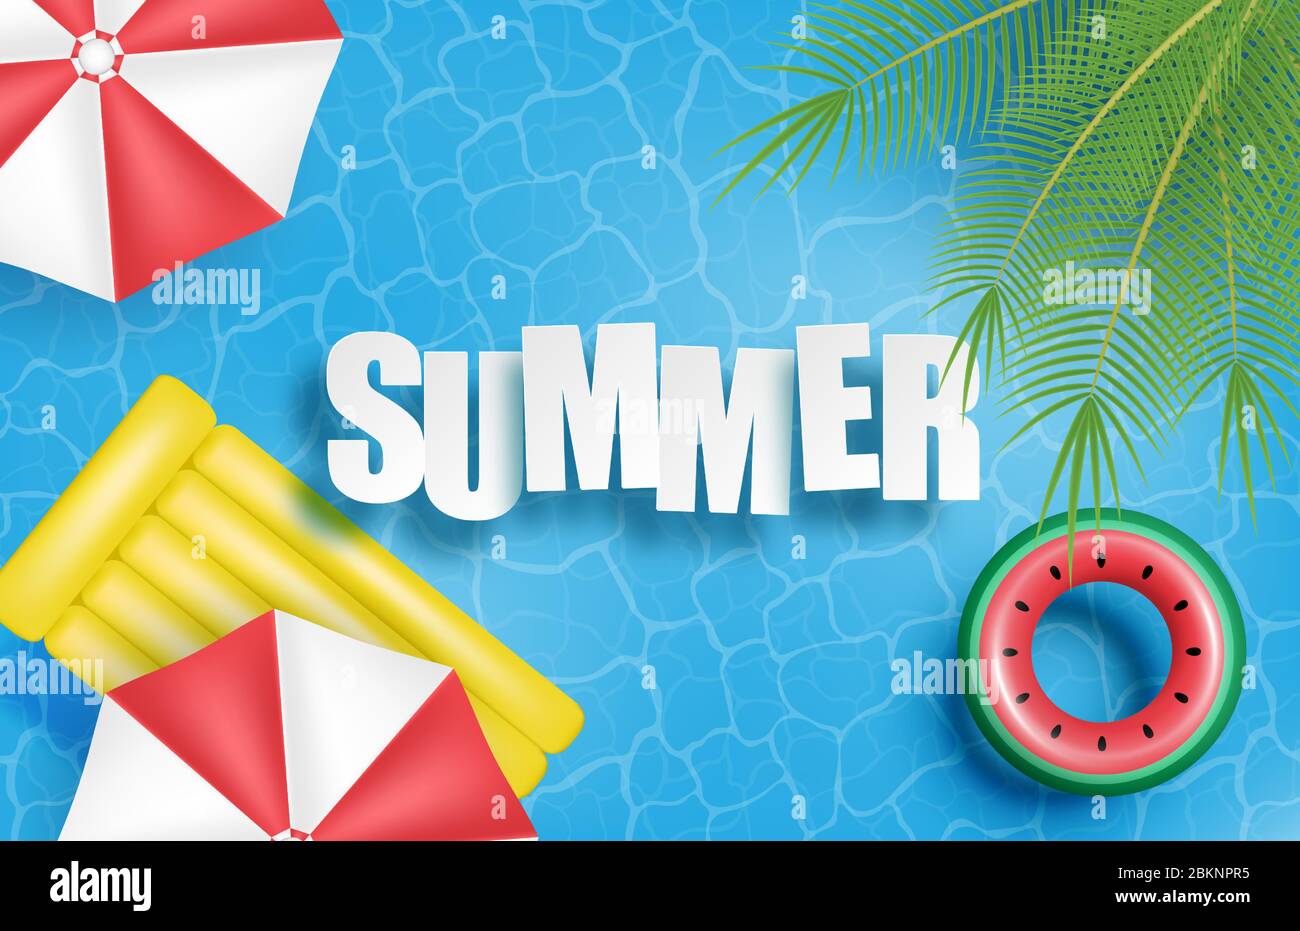 Summer banner or poster. Swimming pool with palm, umbrella, inflatable rubber bed, swim ring and on water. Top view. Shopping promotion template for s Stock Vector